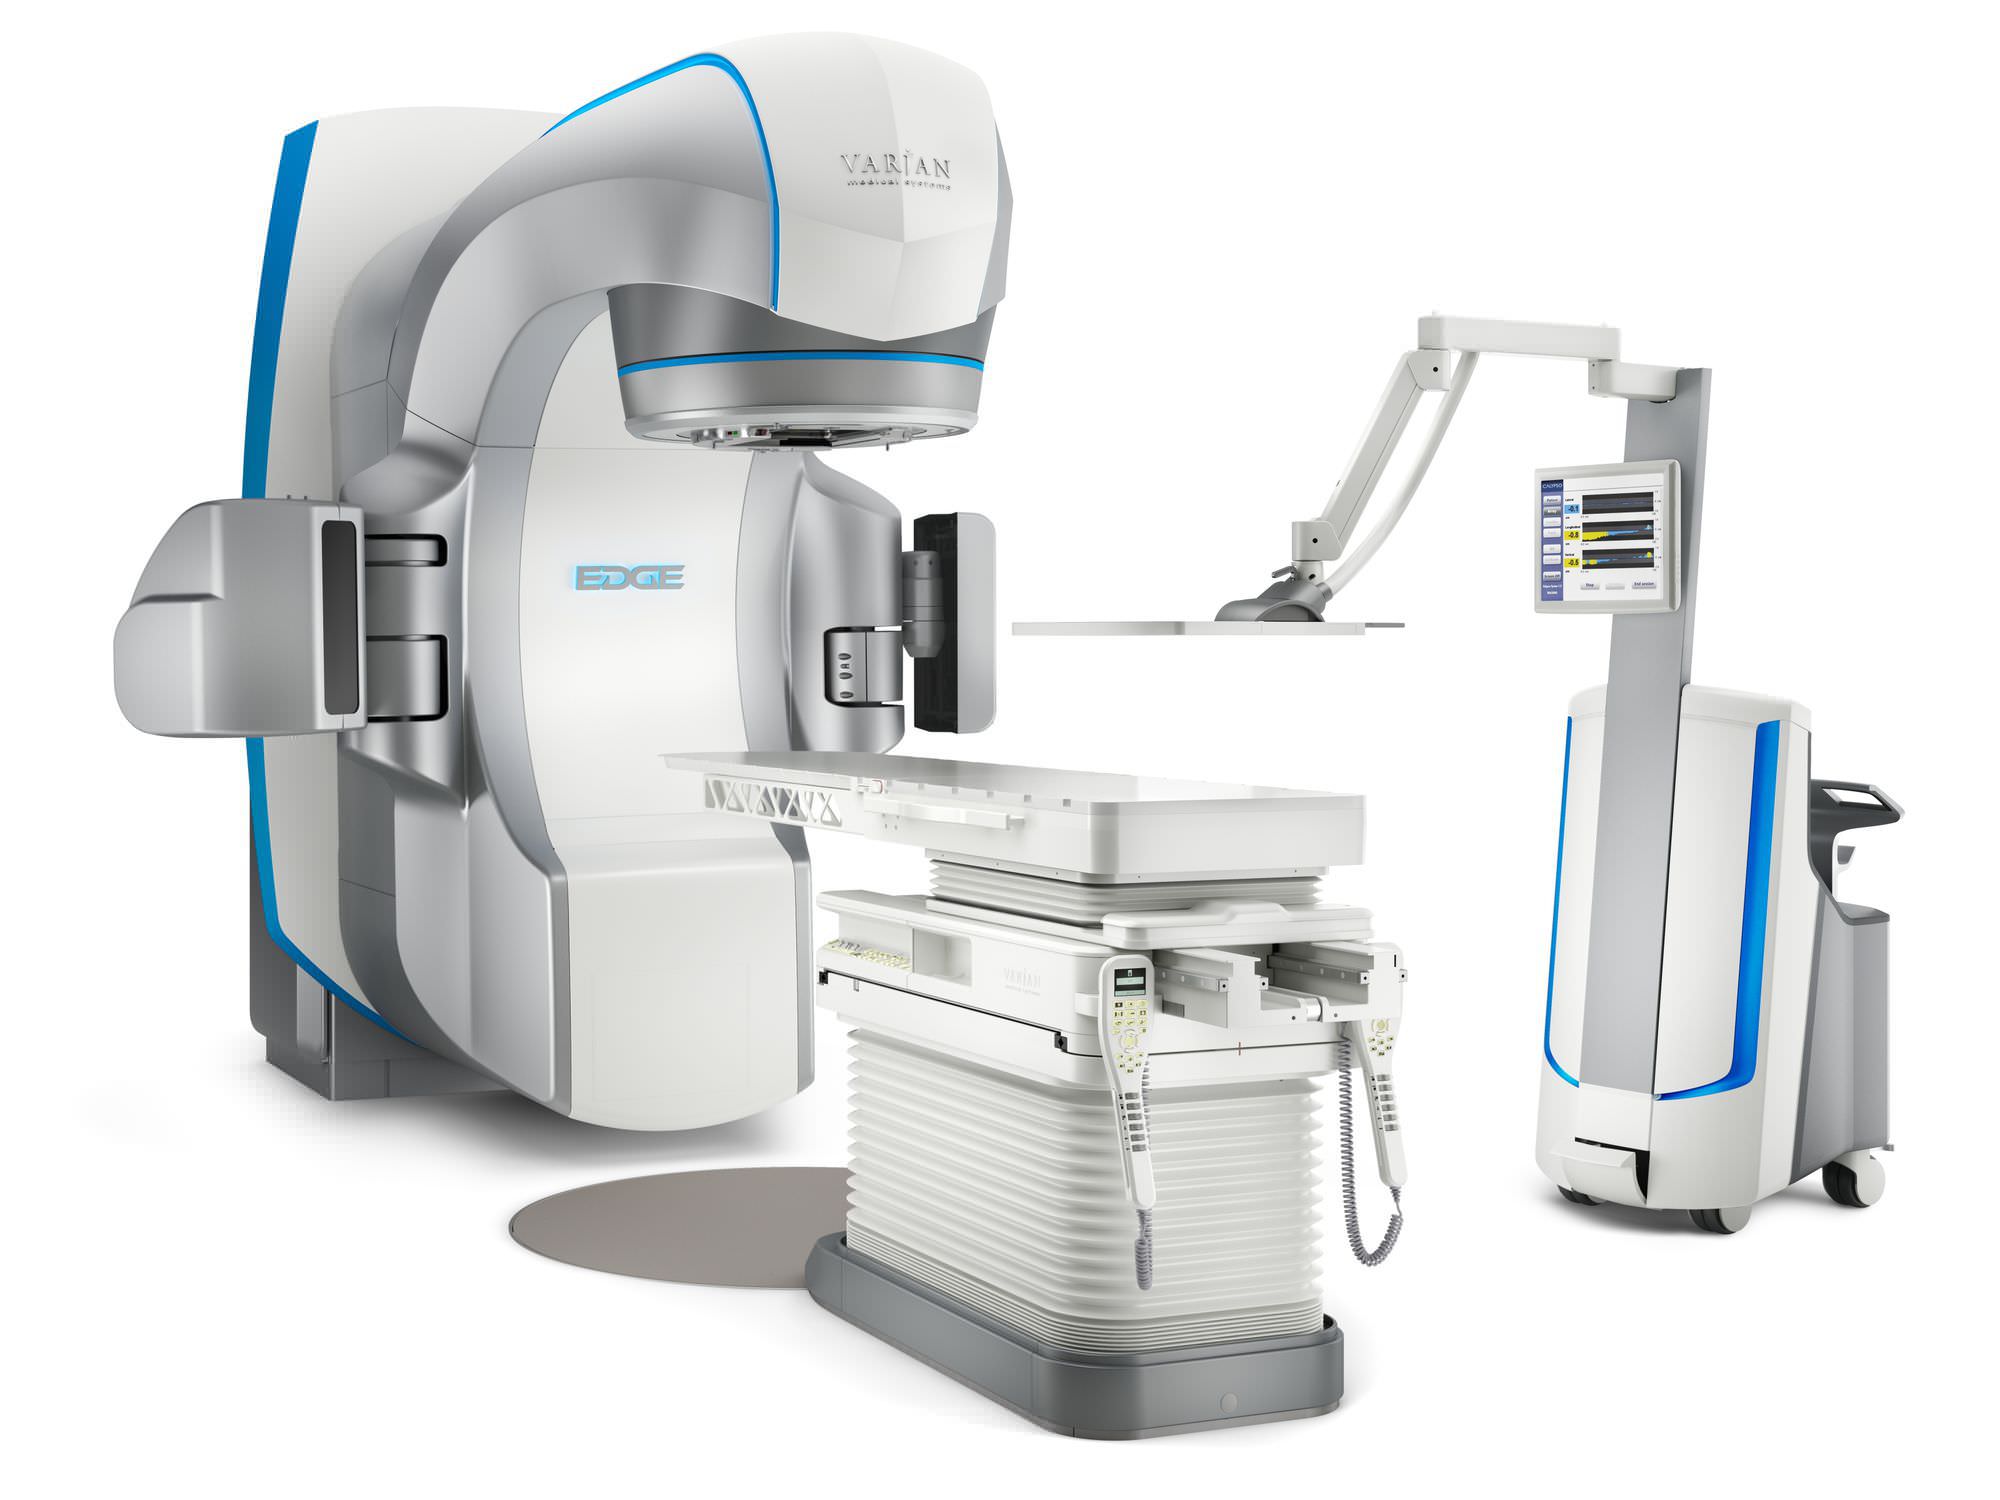 Stereotactic radiosurgery linear particle accelerator / robotized positioning tables Edge™ Varian Medical Systems